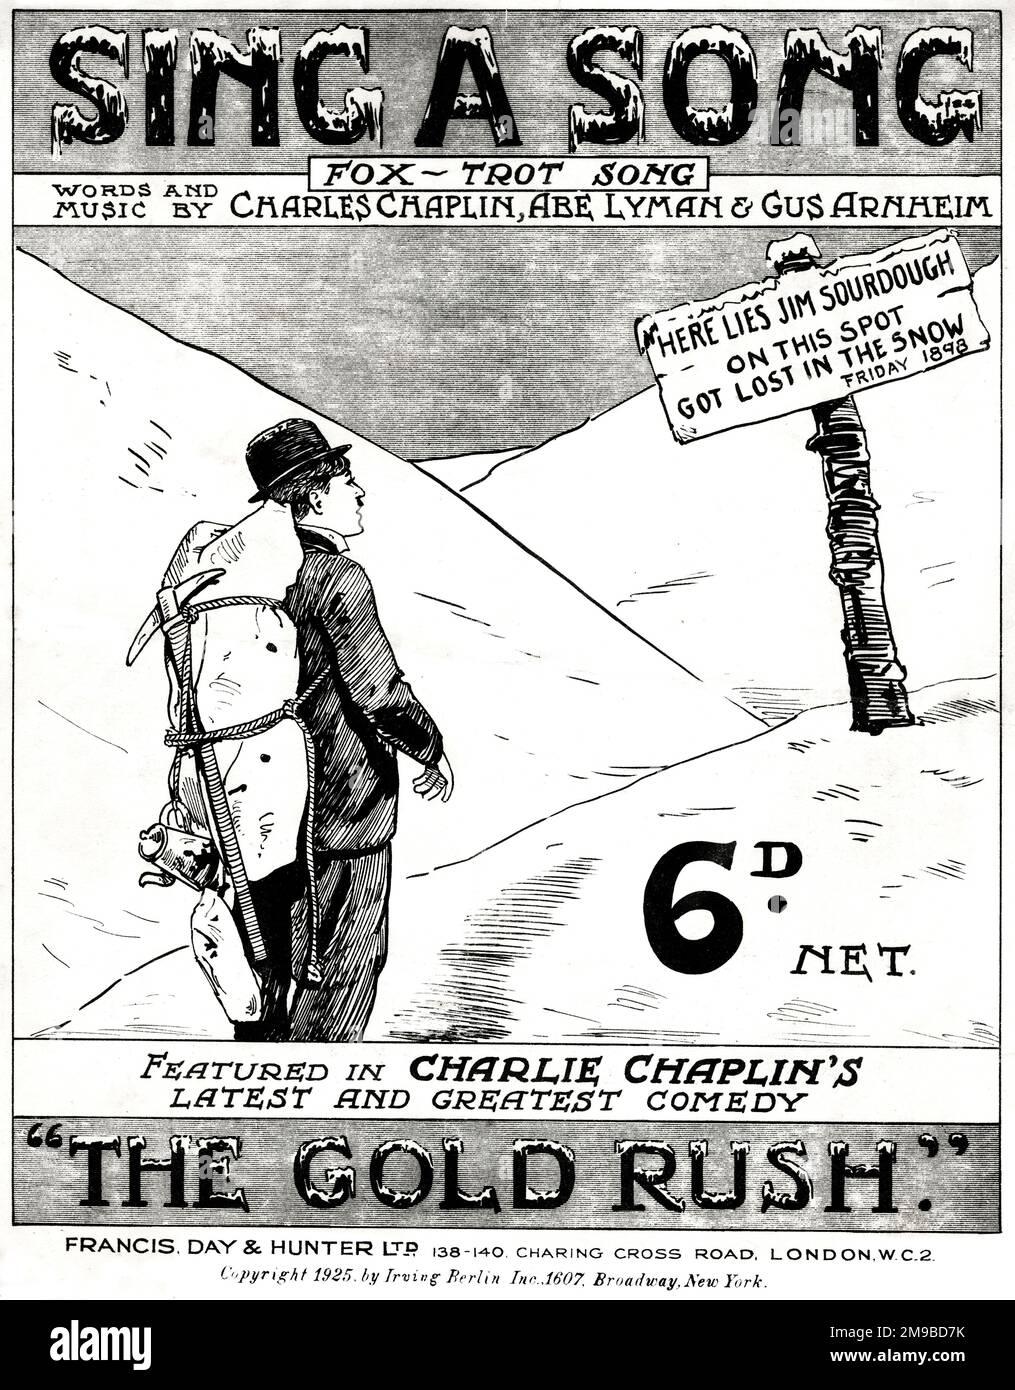 Music cover, Sing A Song, foxtrot song, words and music by Charles Chaplin, Abe Lyman and Gus Arnheim, featured in Charlie Chaplin's comedy film The Gold Rush Stock Photo